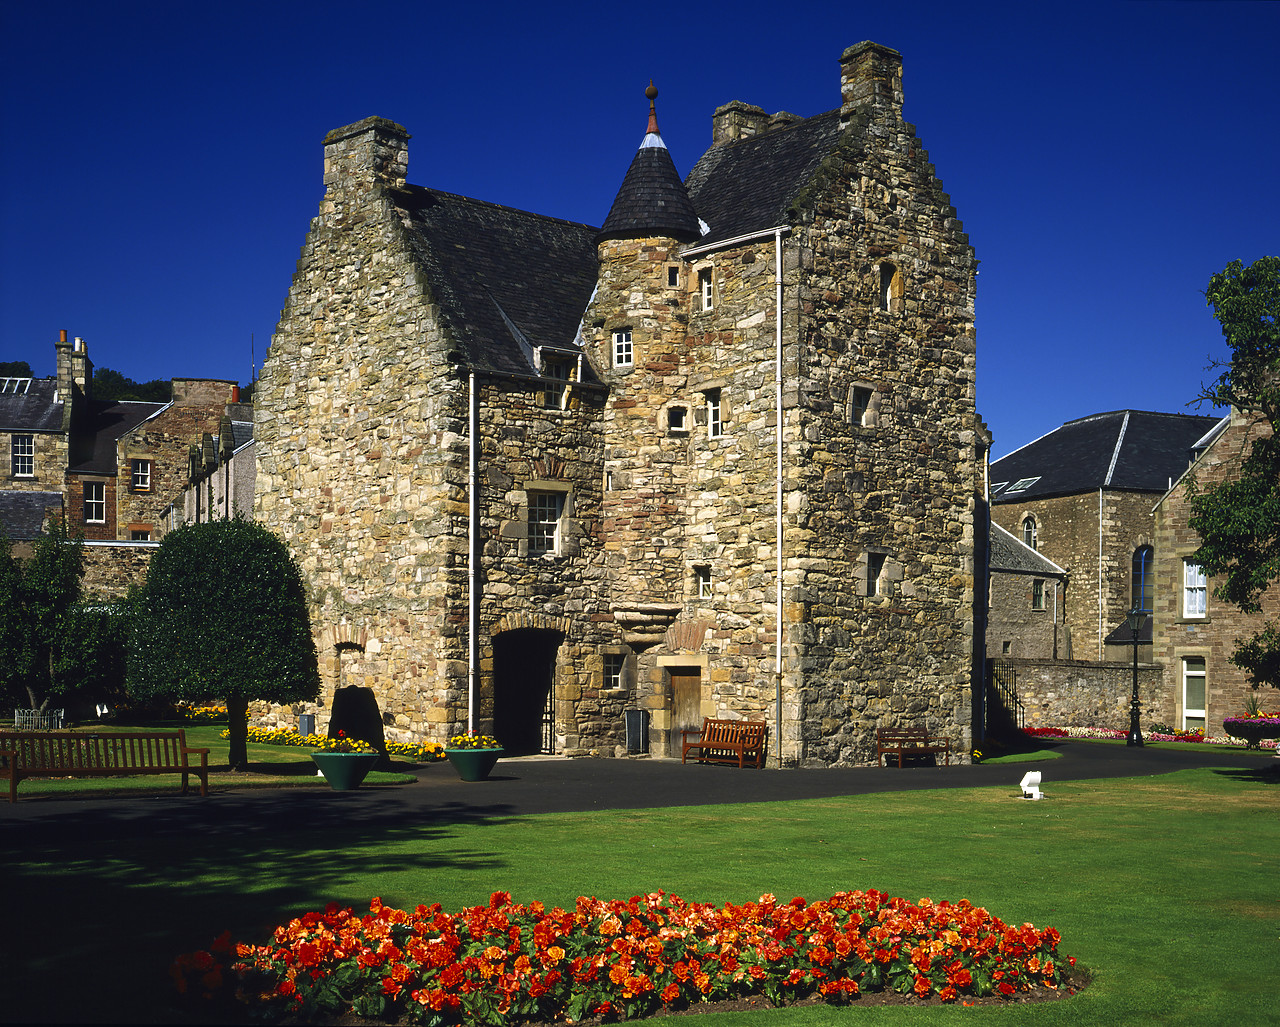 #913671-1 - Mary Queen of Scots House, Jedburgh, Borders, Scotland